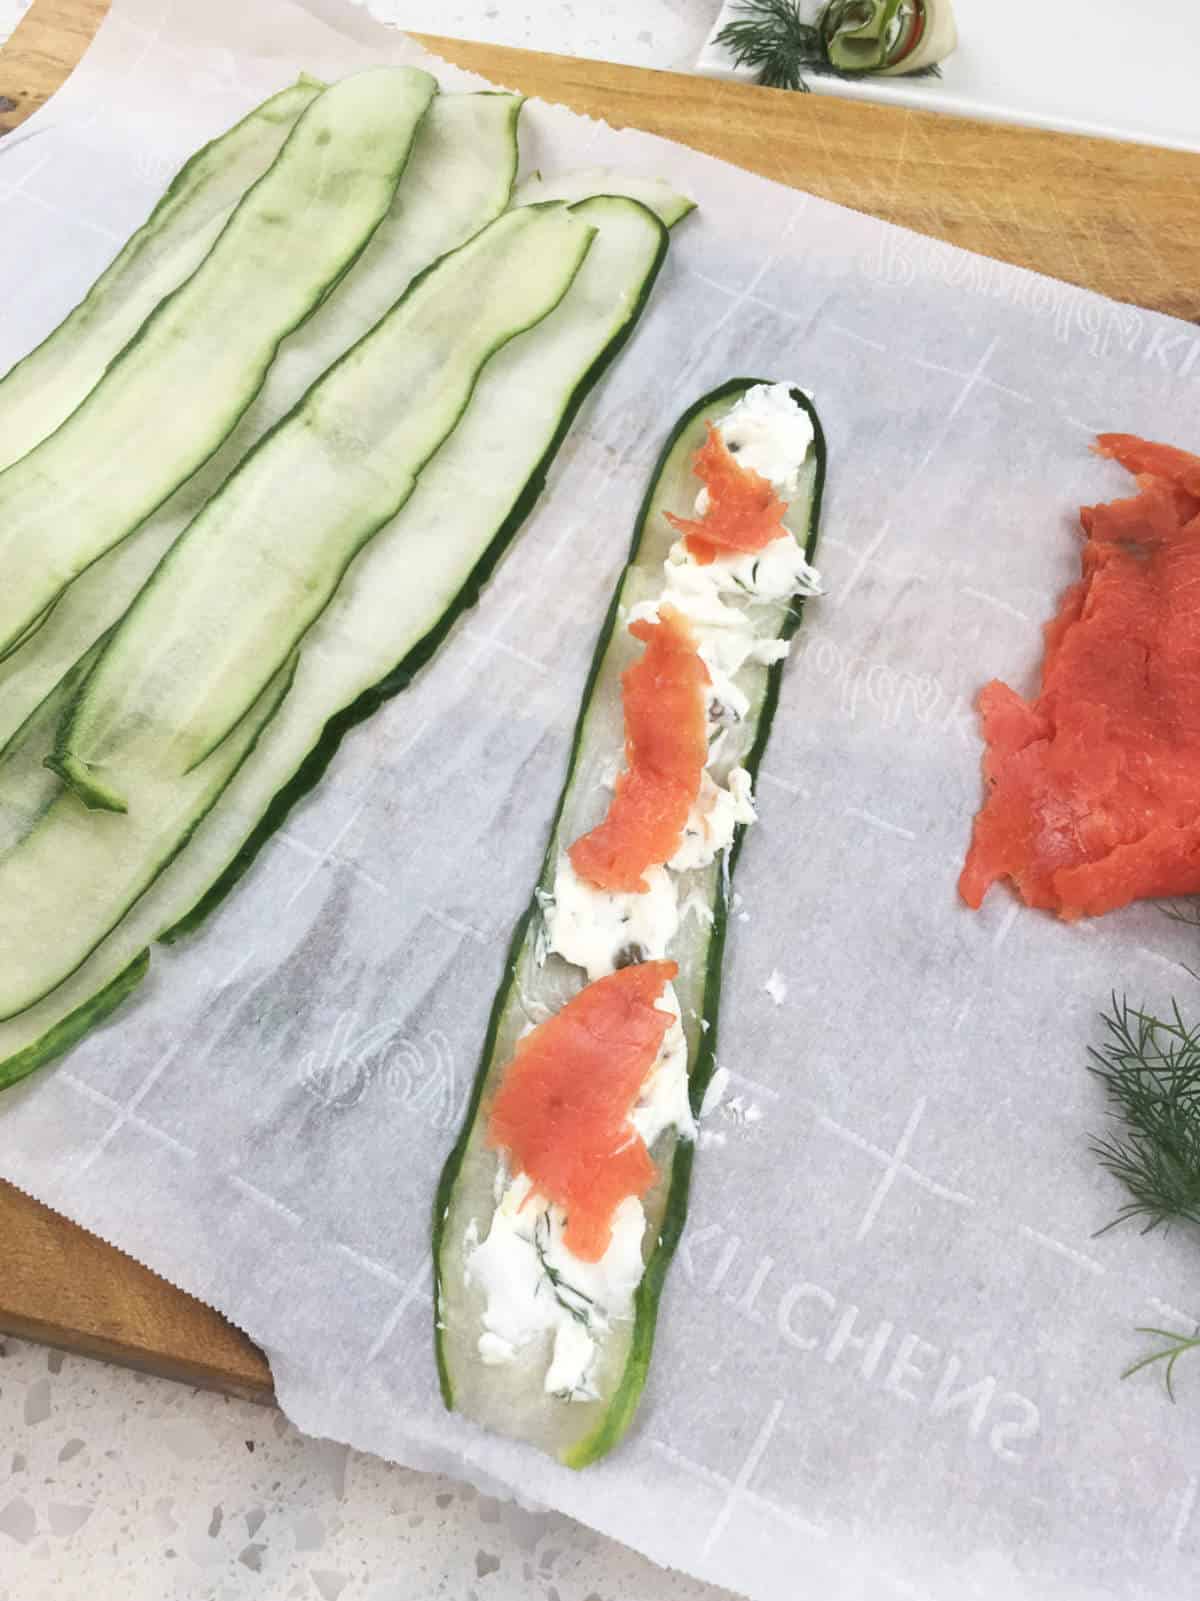 cream cheese and smoked salmon spread on ribbons of cucumber.